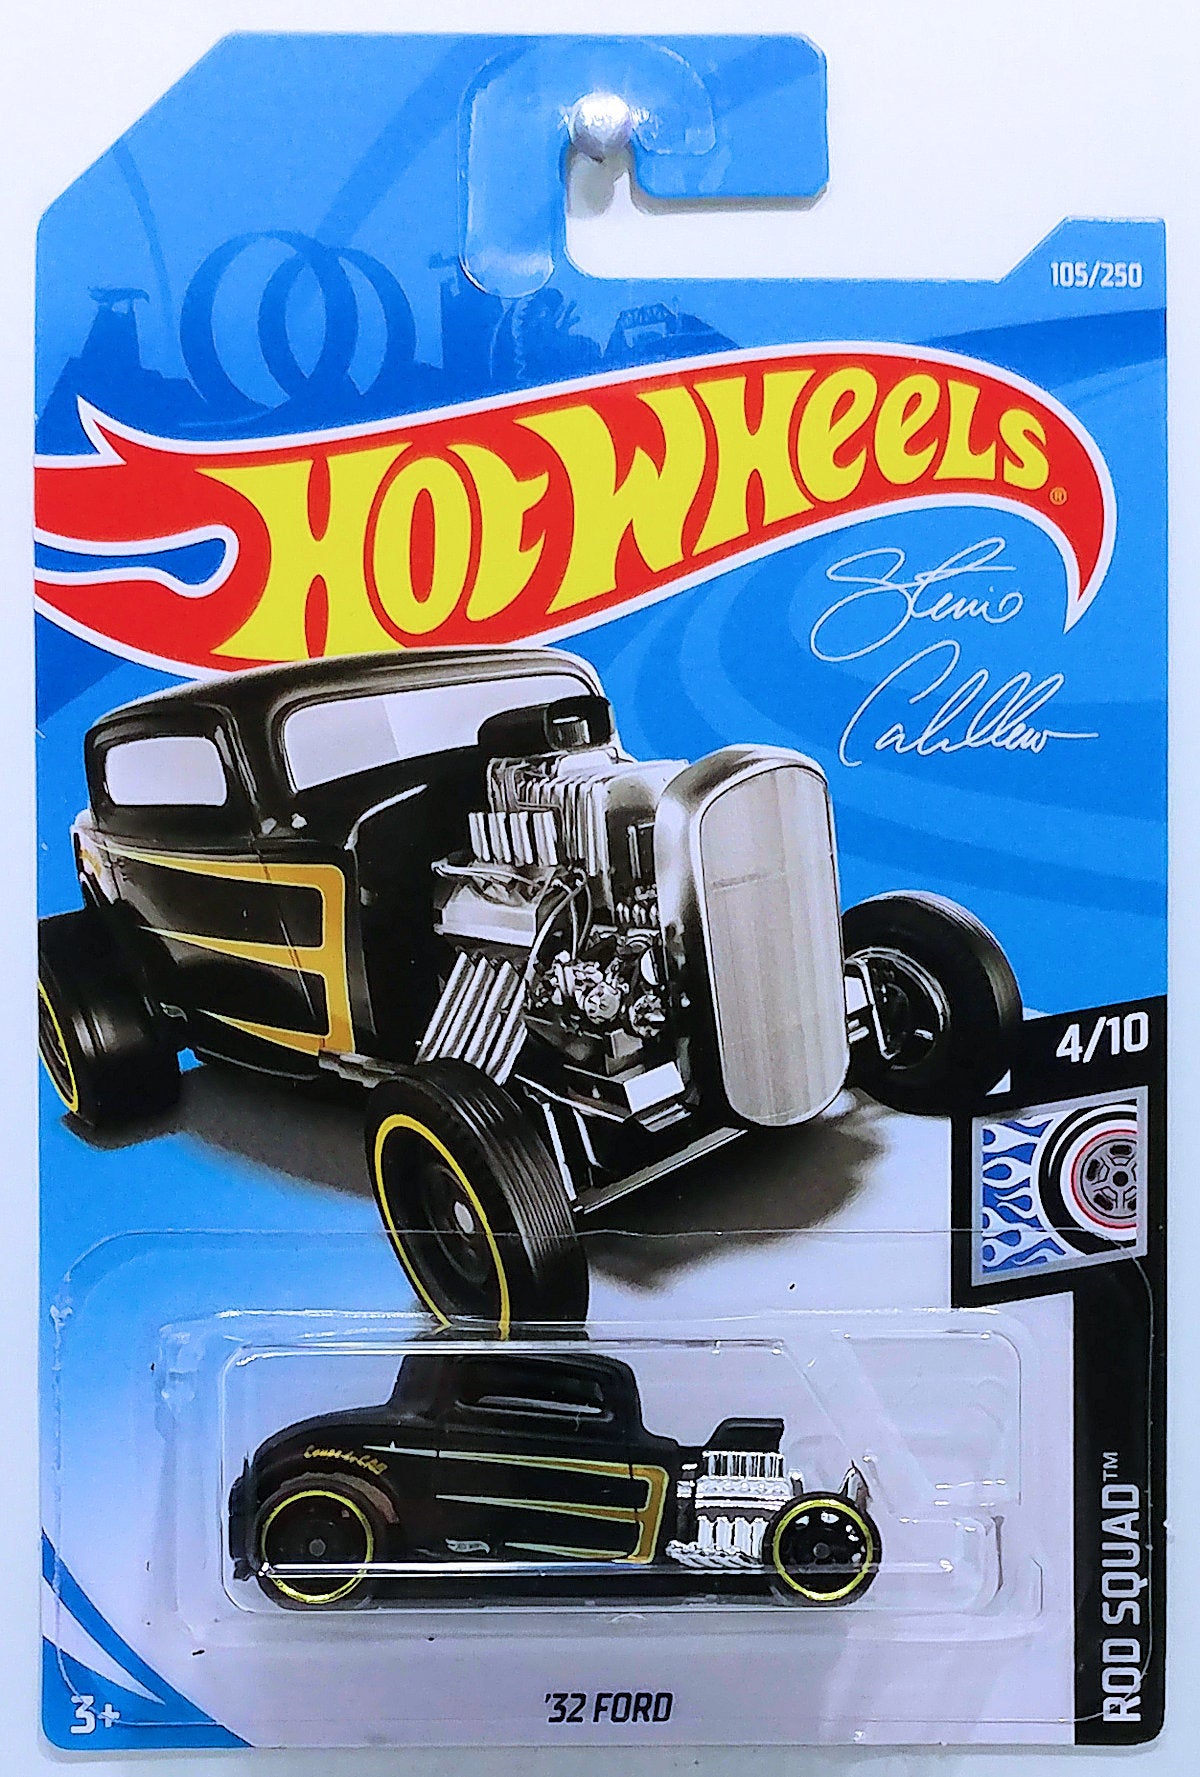 Hot Wheels 2019 - Collector # 105/250 - Rod Squad 4/10 - '32 Ford - Black - IC